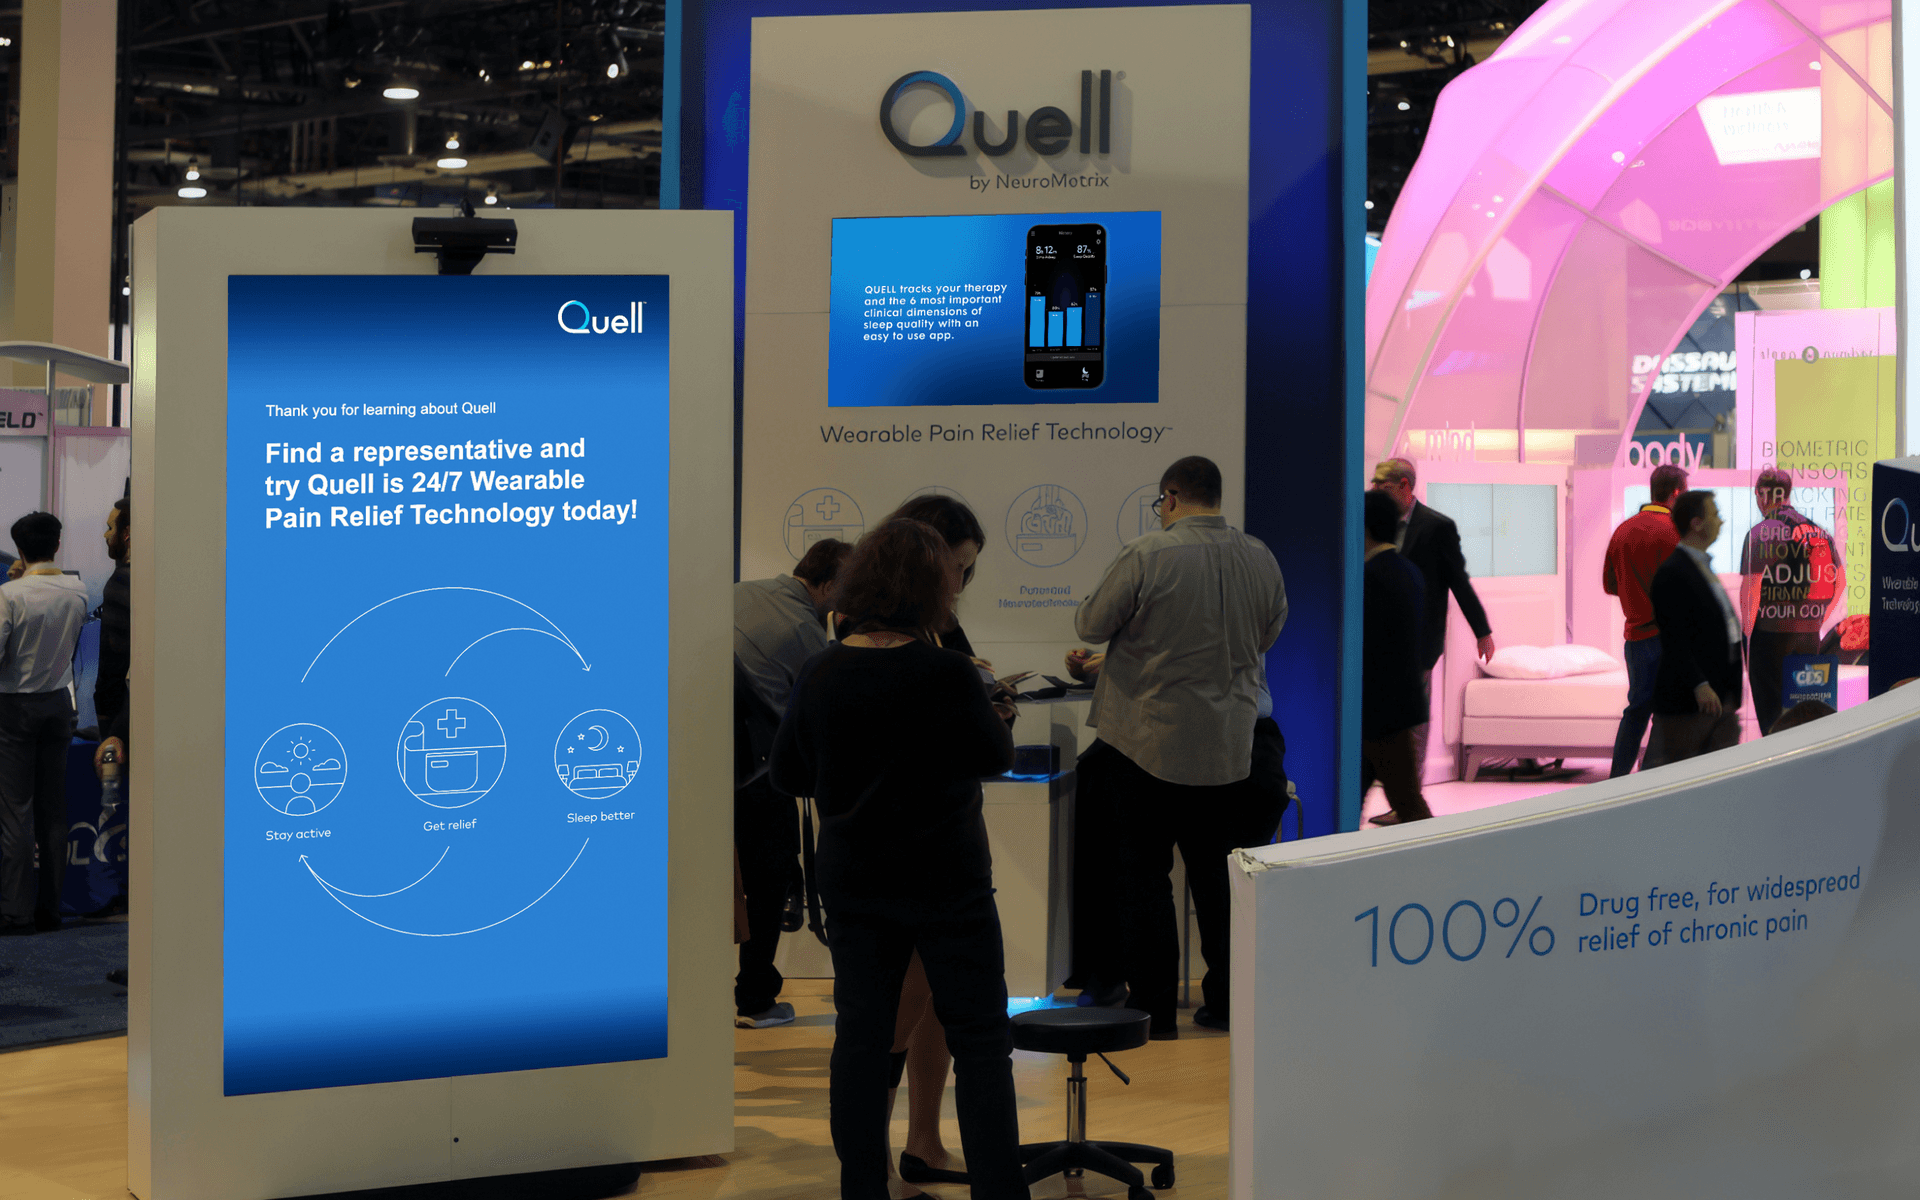 The Quell booth at CES. In the foreground a large display with a device mounted at the top thanks users for learning and directs users to speak to a representative. In the background business people talk in front of another wall mounted screen.